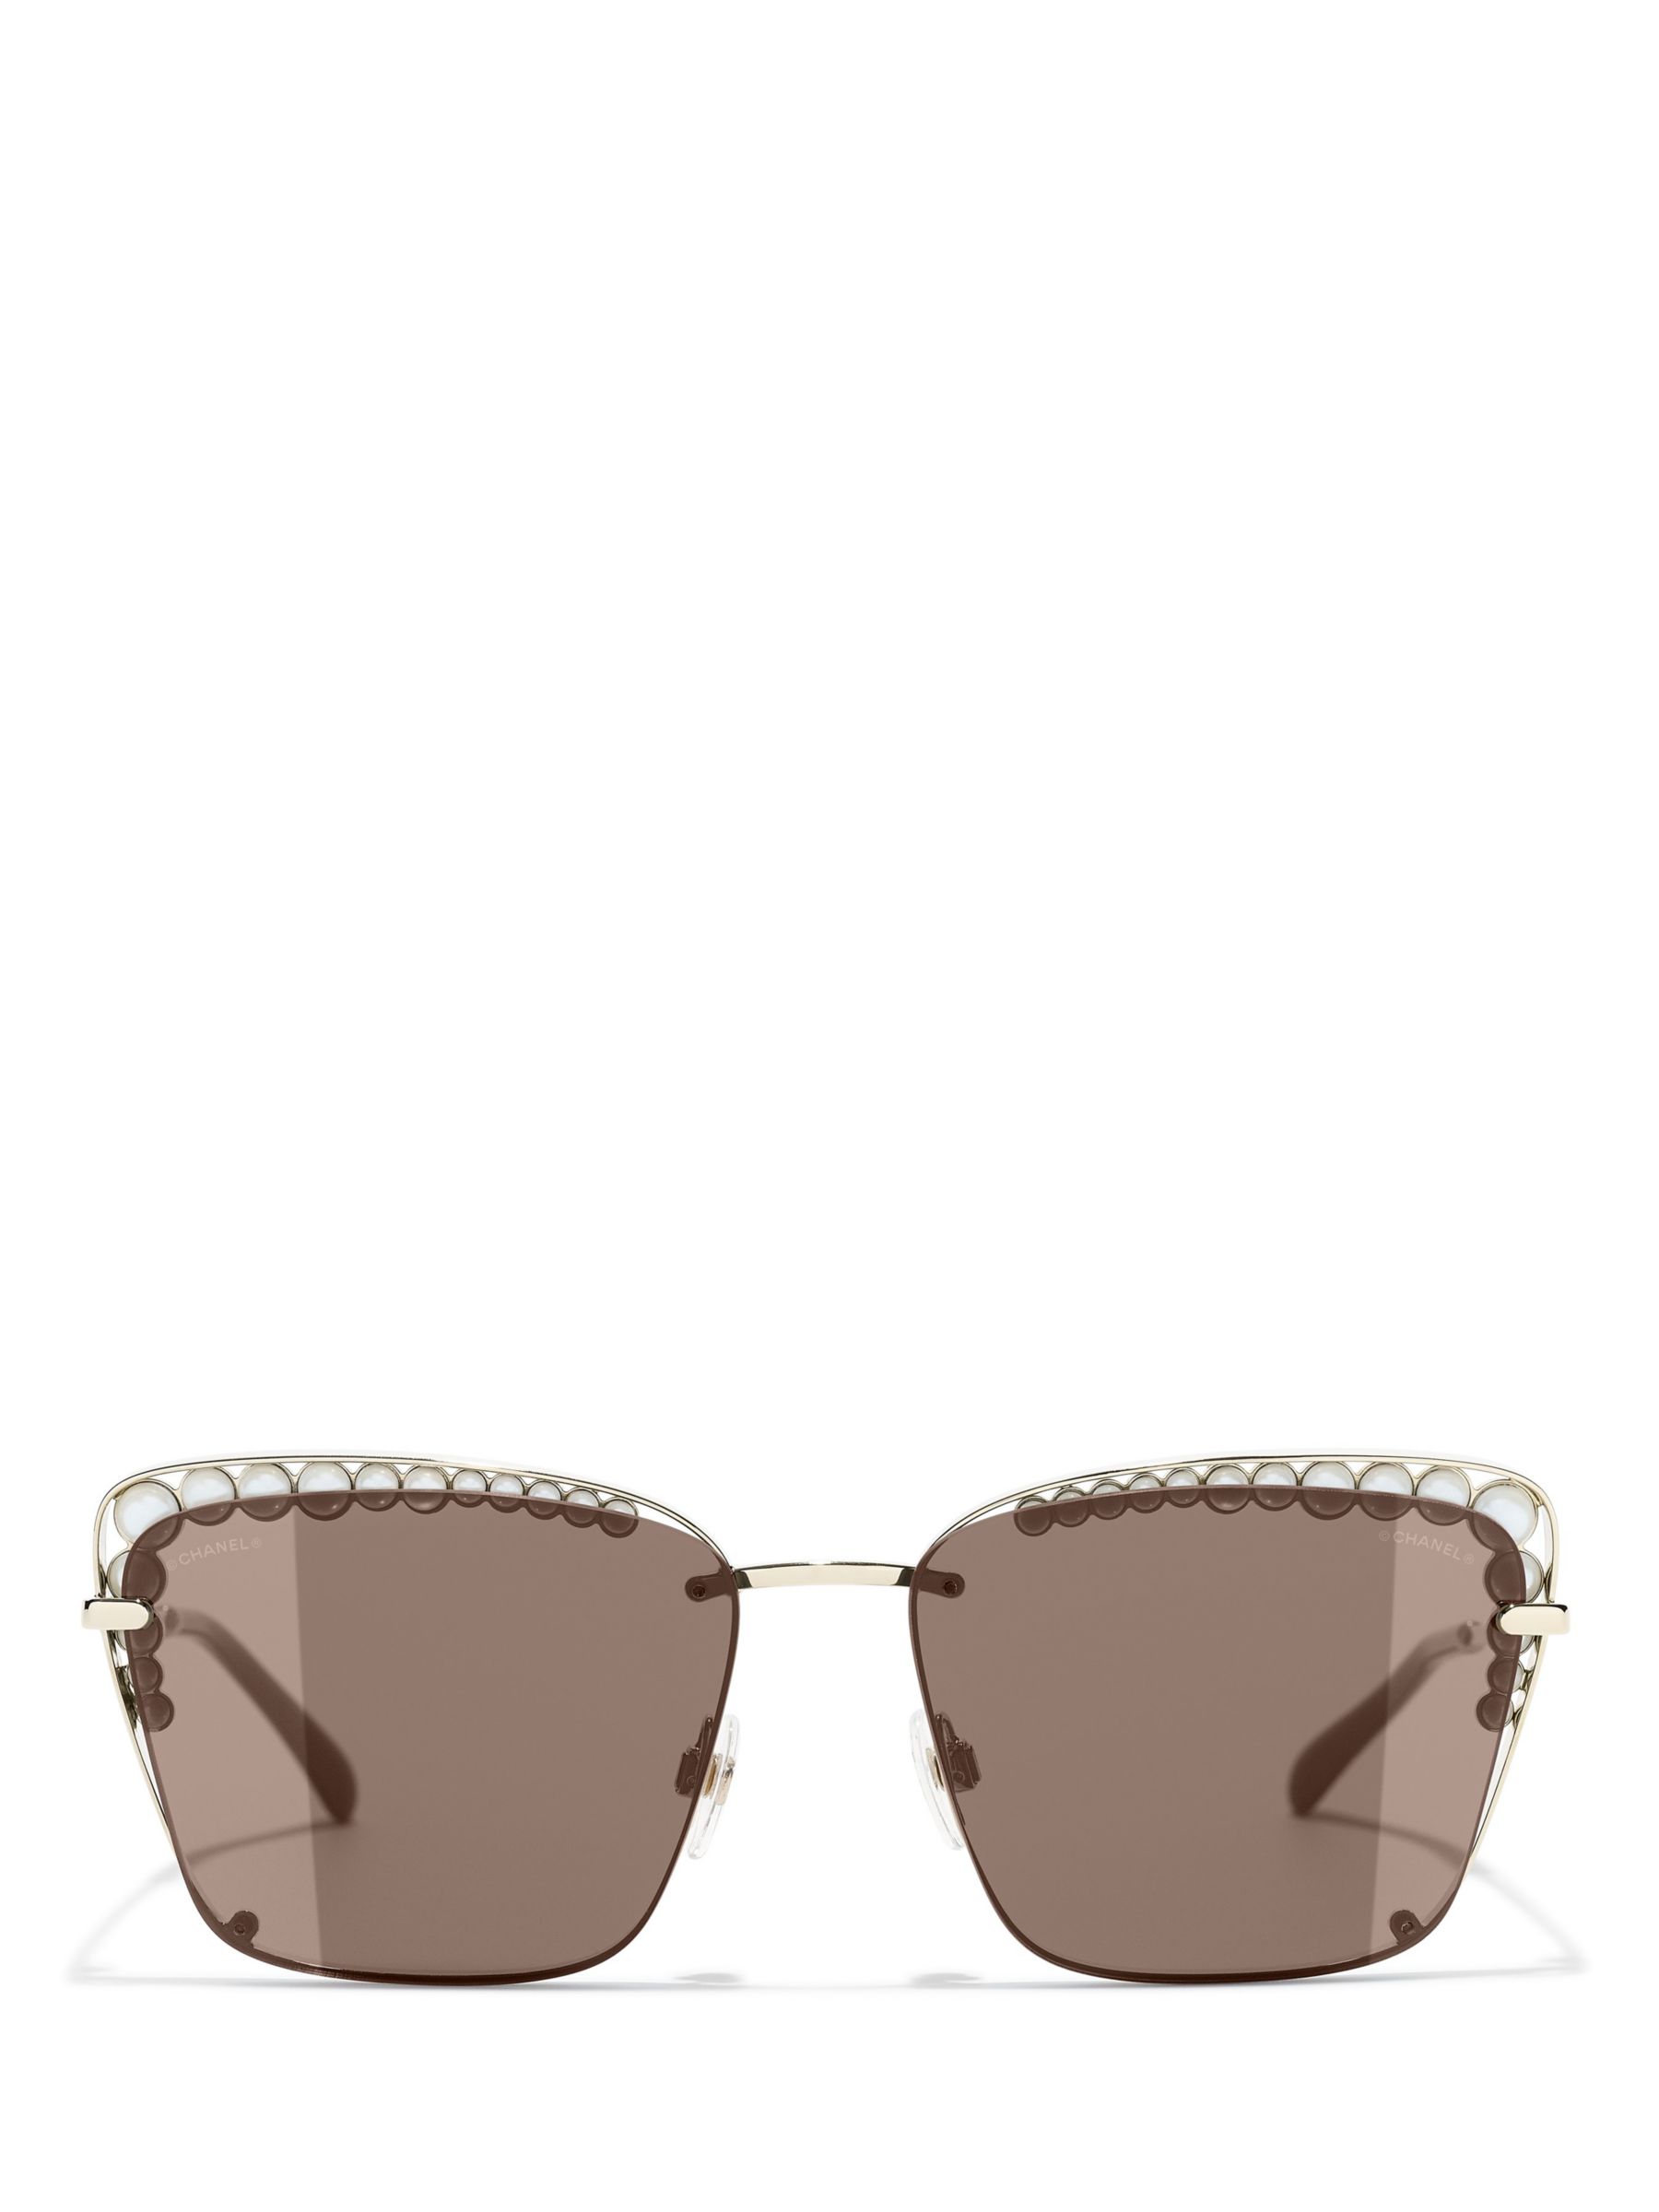 Buy CHANEL Square Sunglasses CH4235H Gold Online at johnlewis.com